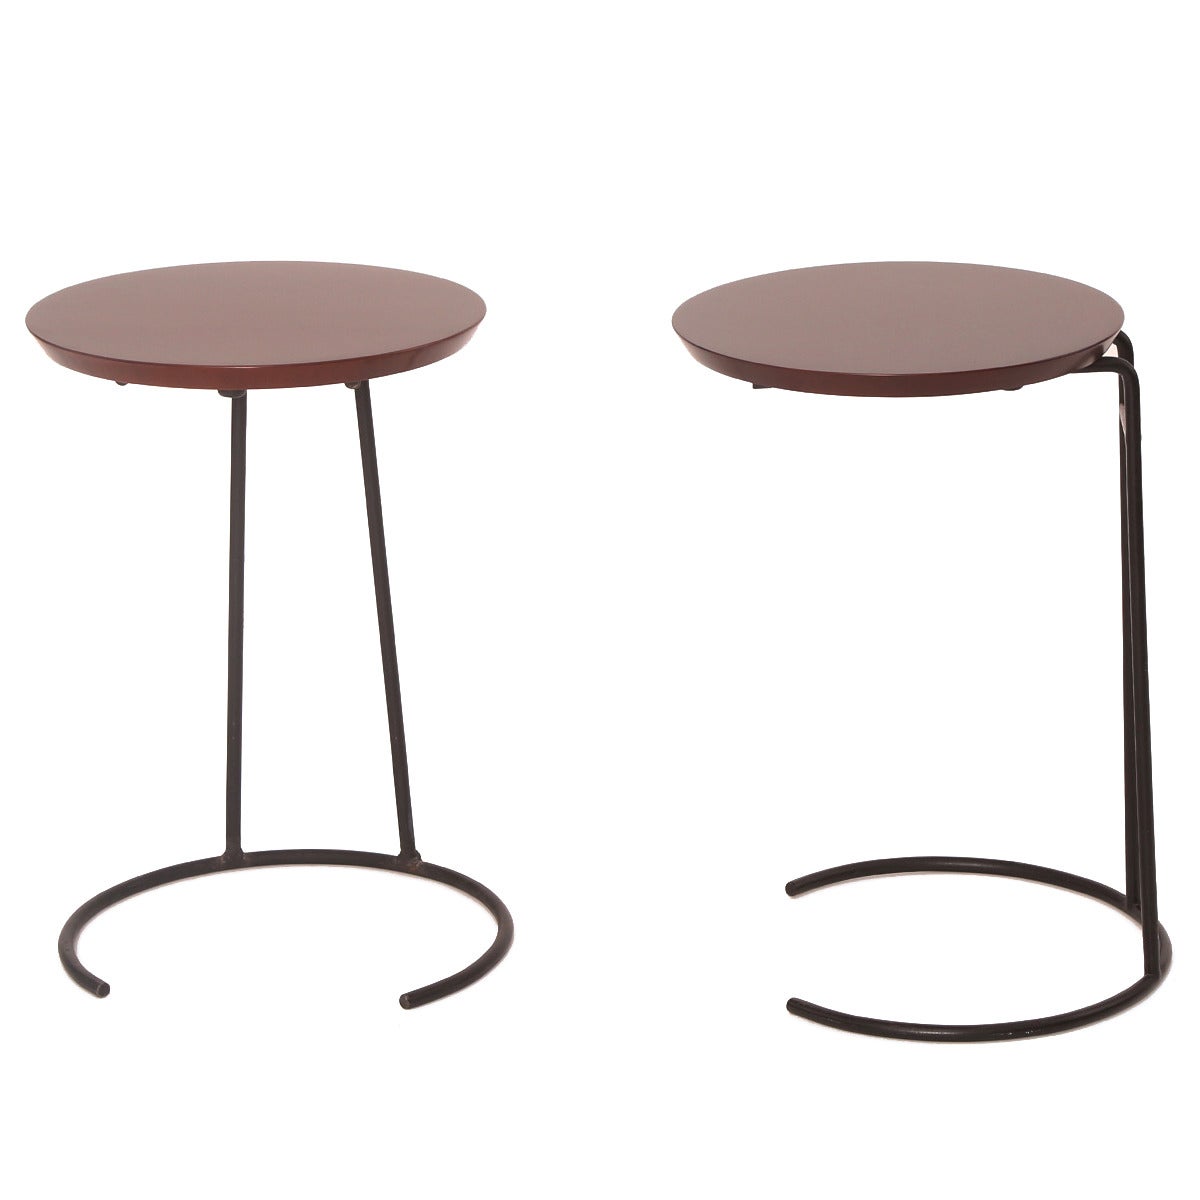 Pair of Jens Risom Iron & Maple Side Tables